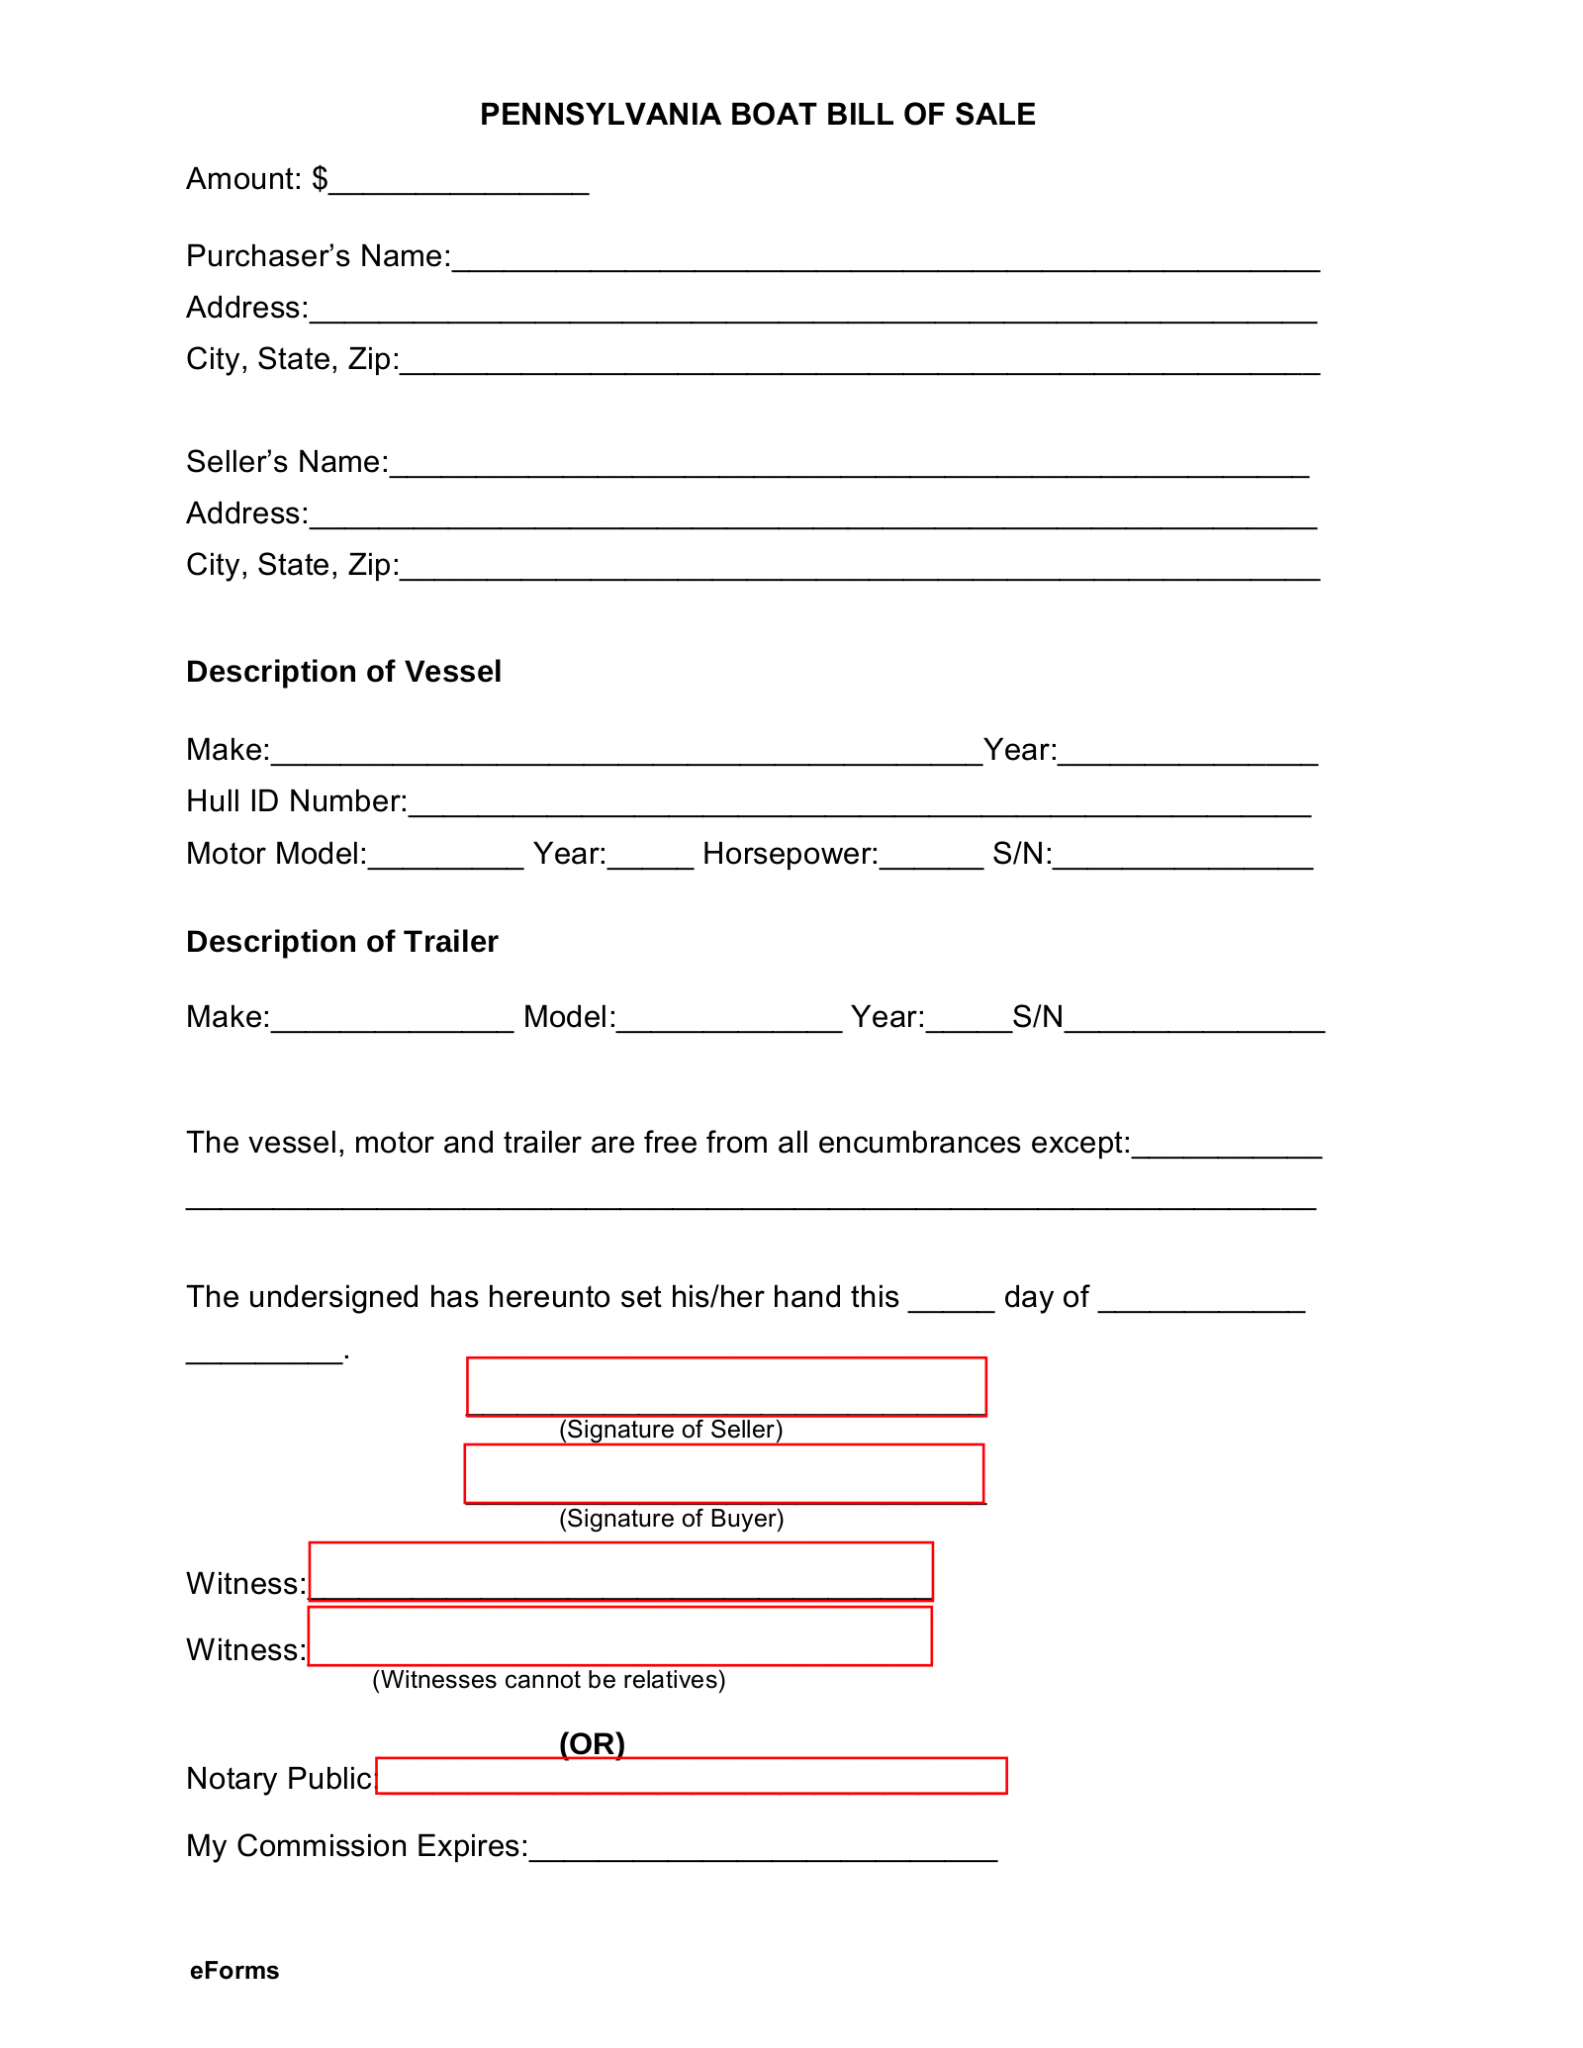 free-pennsylvania-bill-of-sale-forms-4-pdf-word-eforms